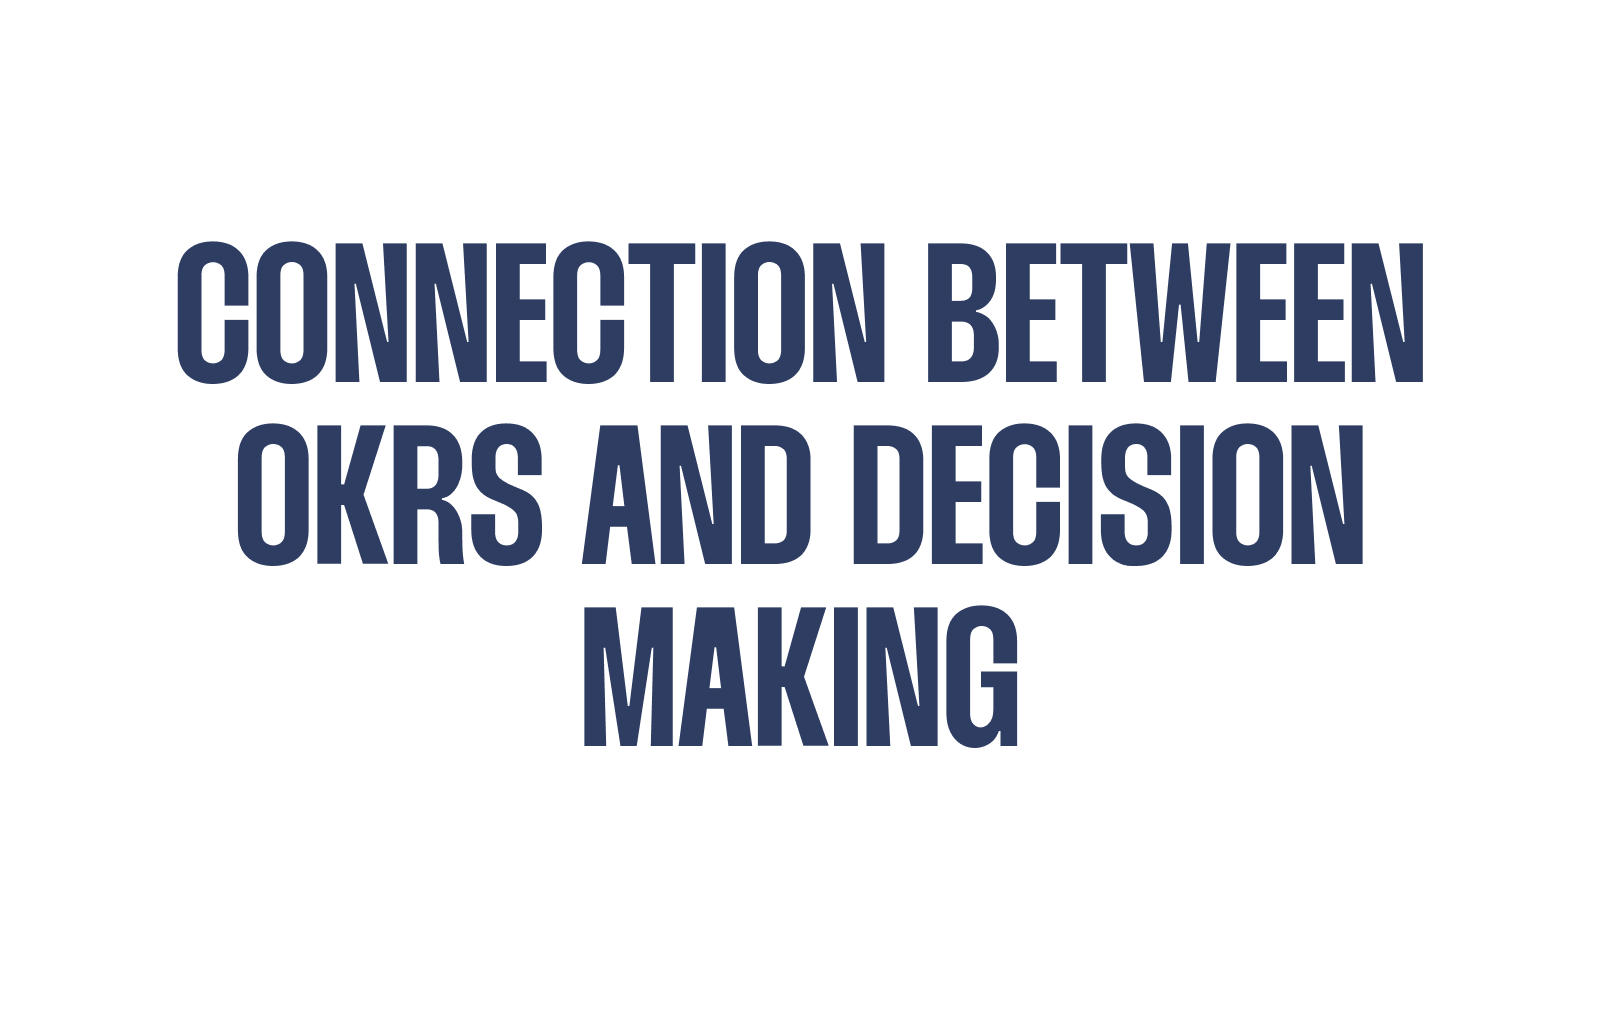 Exploring the Connection Between OKRs and Decision Making